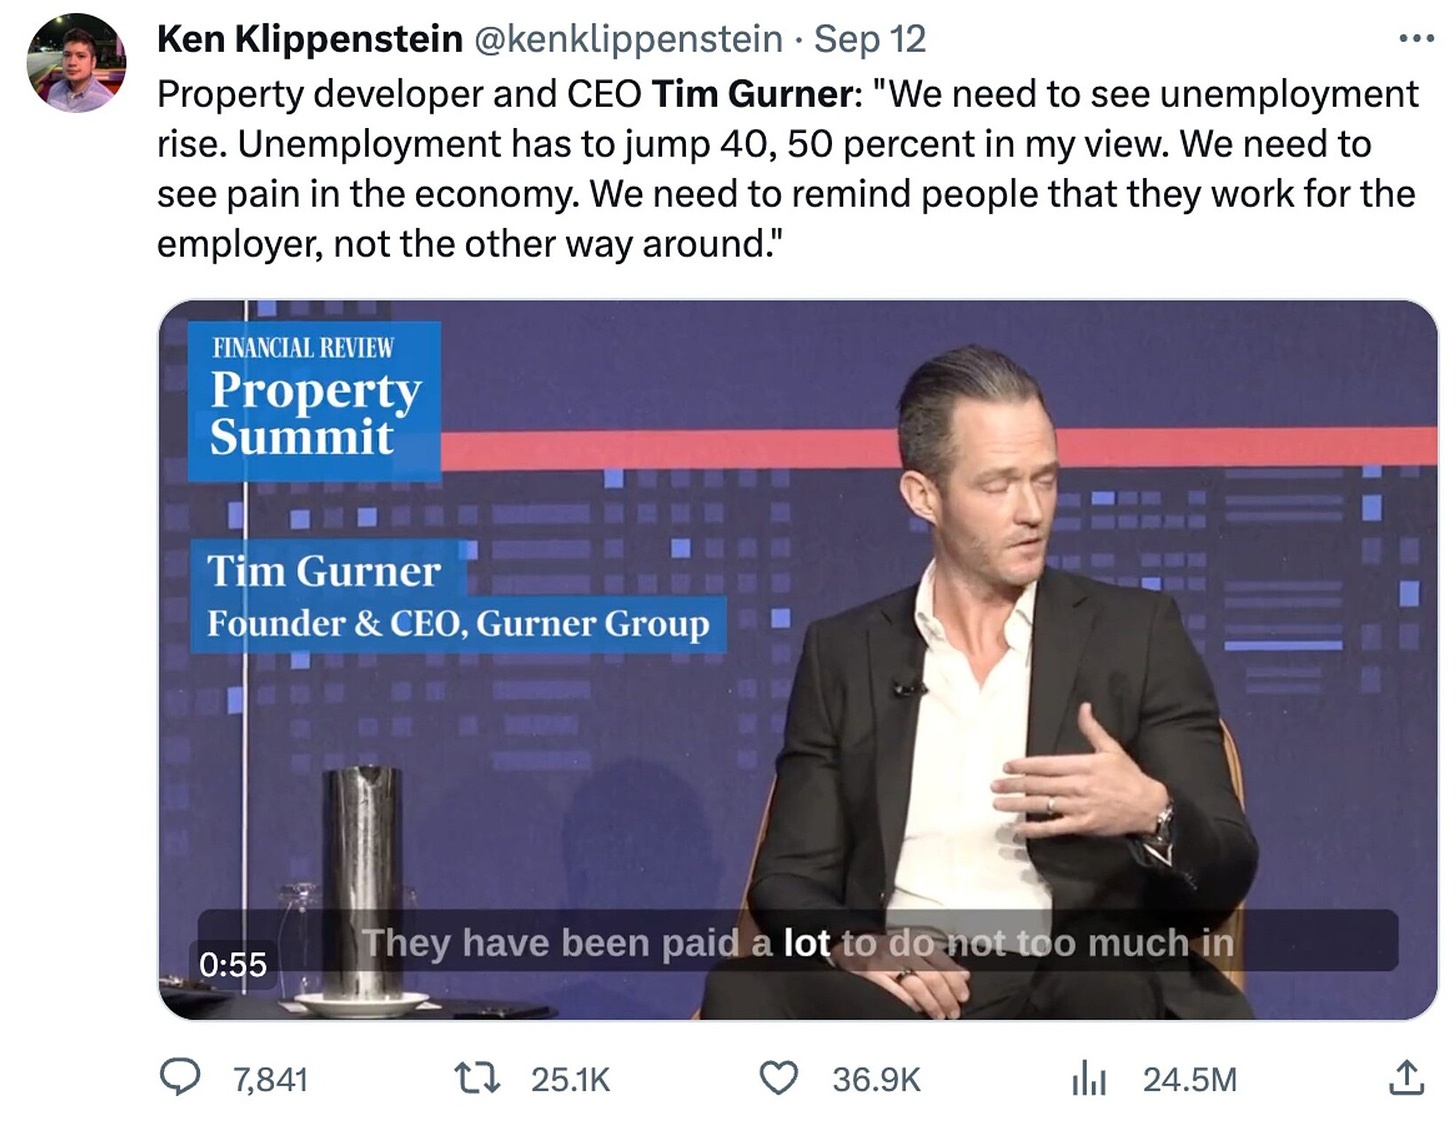 A tweet: Property manager Tim Gurner We need to see unemployment rise. Unemployment has to jump 40, 50 percent in my view. We need to see pain in the economy. We need to remind people that they work for the employer, not the other way around.